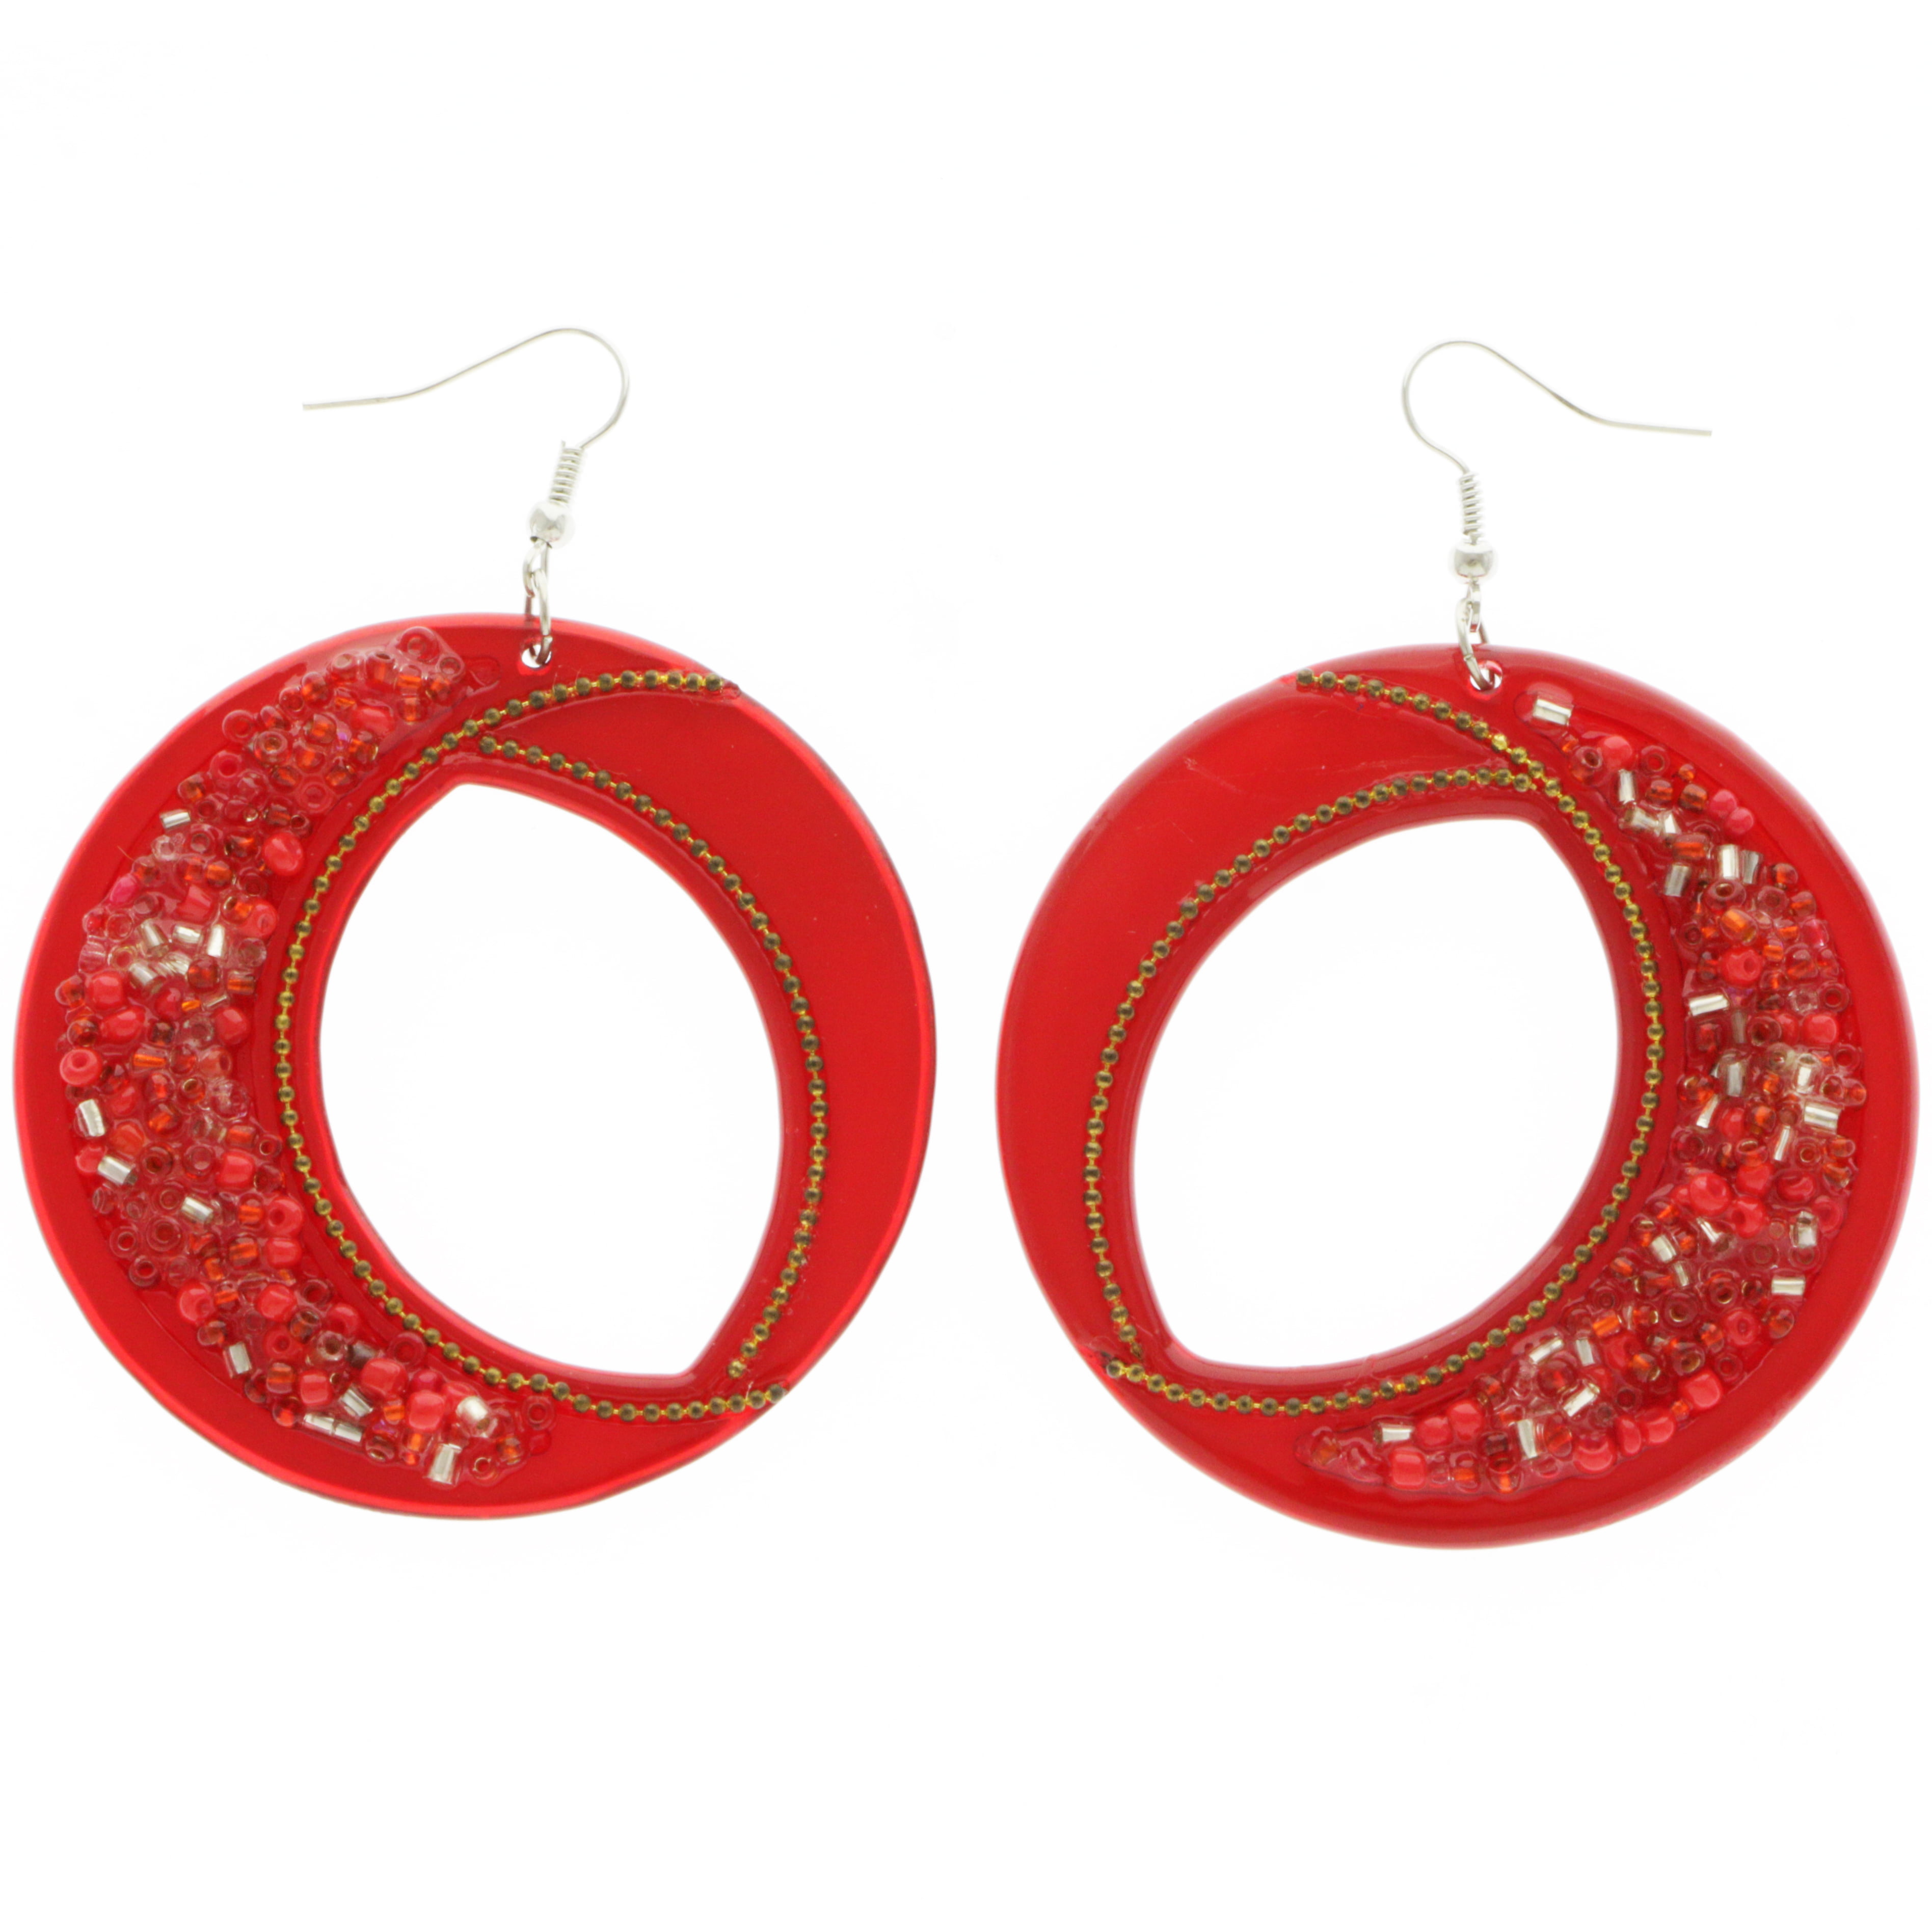 Mi Amore AB Finish Antiqued Hoop-Earrings Bronze-Tone & Red